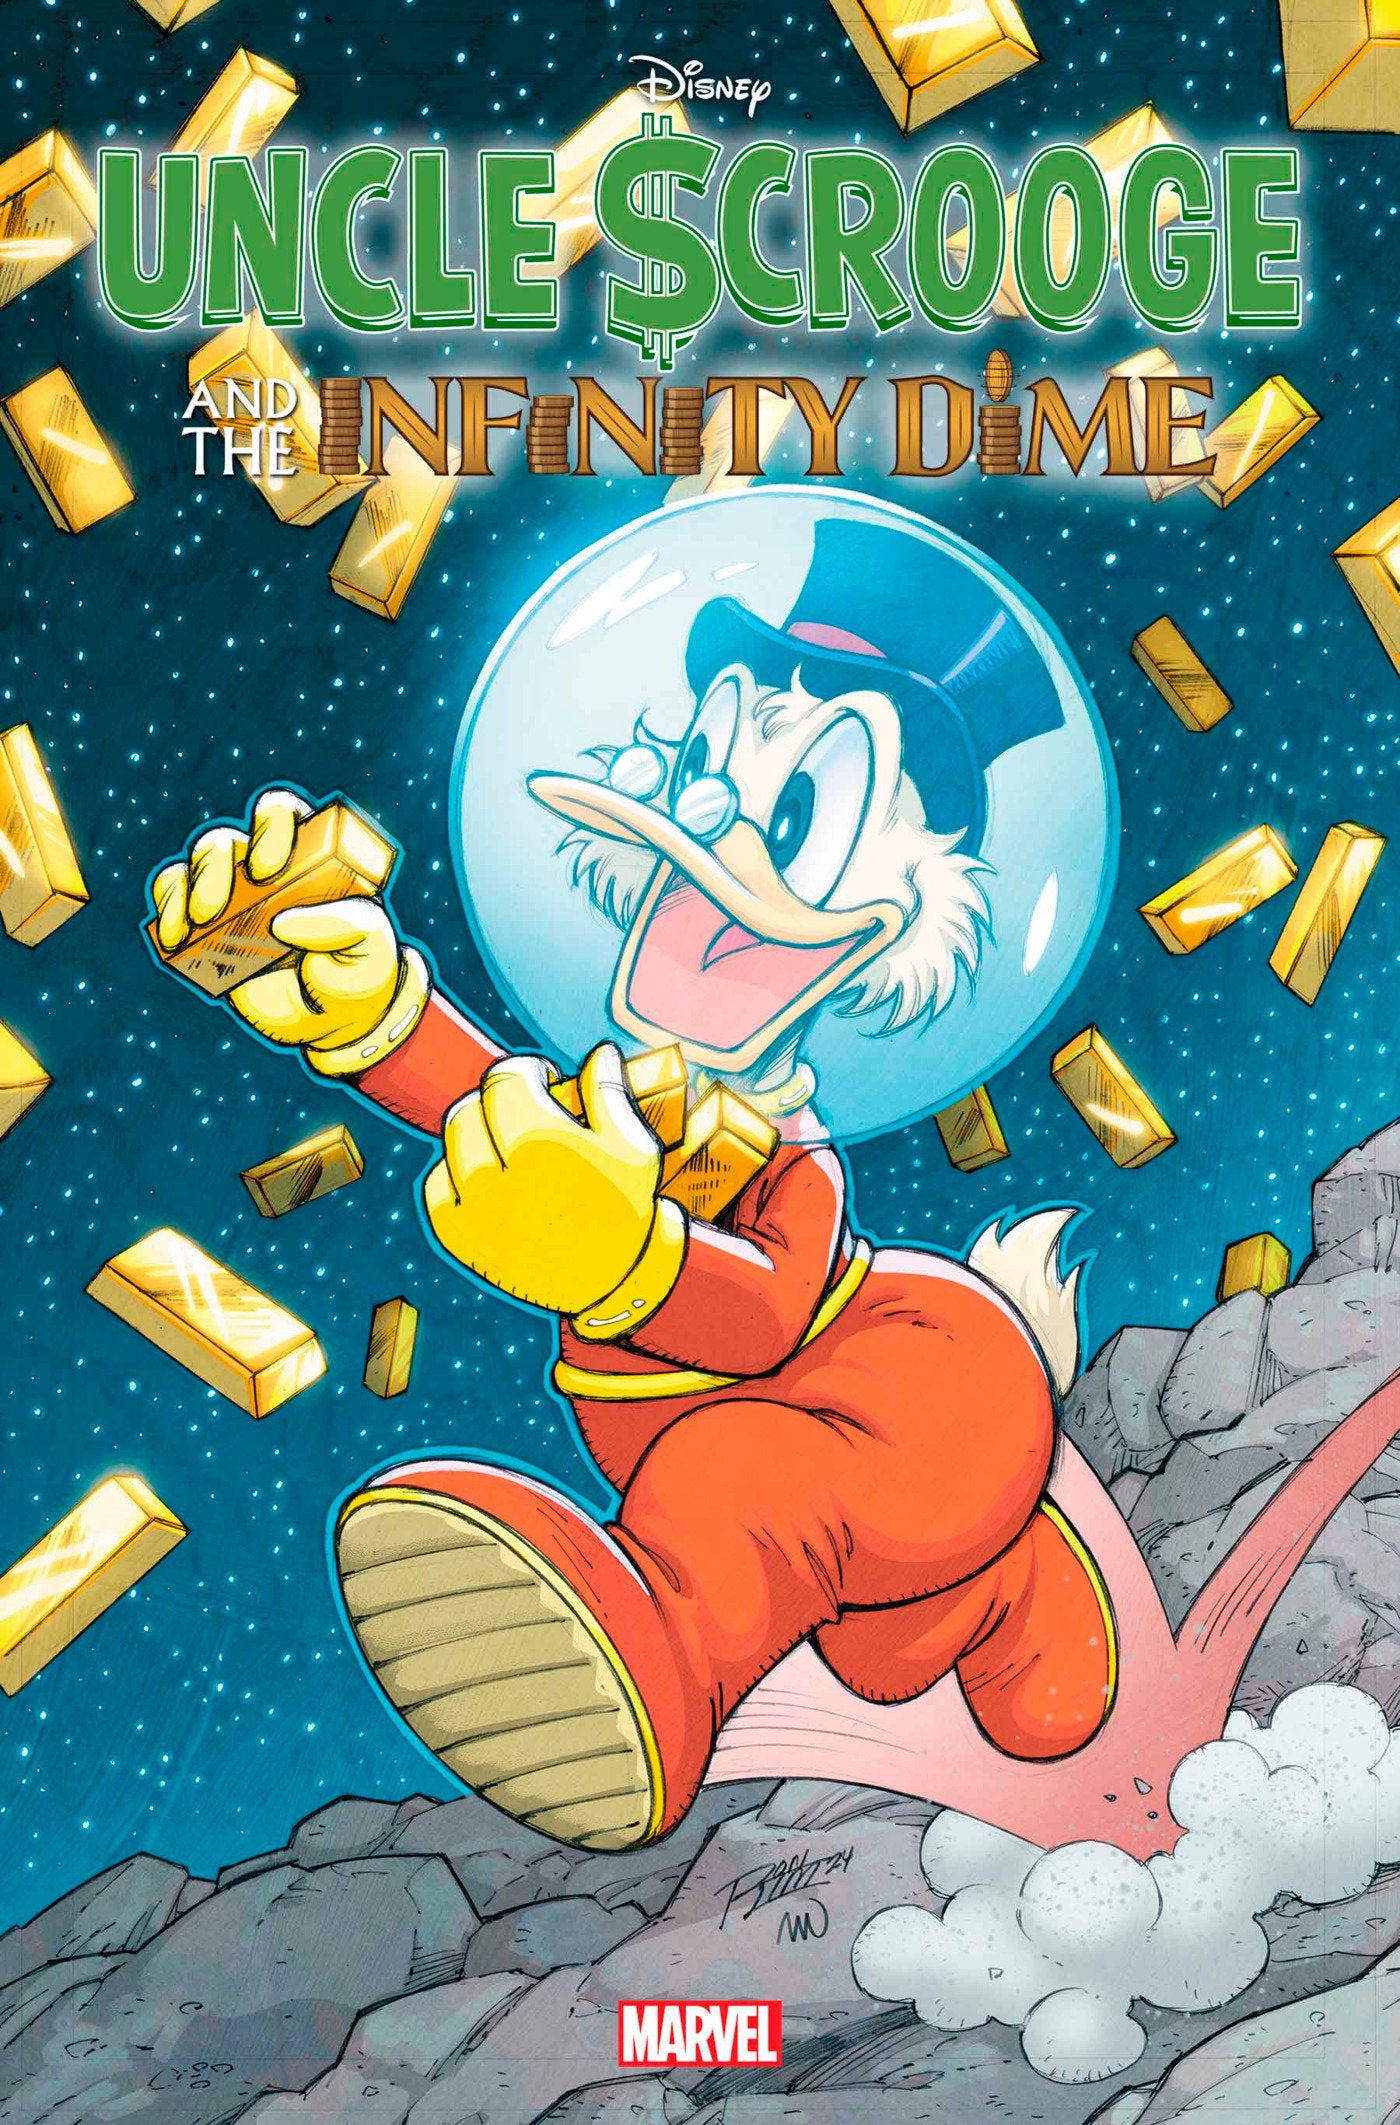 UNCLE SCROOGE AND THE INFINITY DIME #1 RON LIM VARIANT